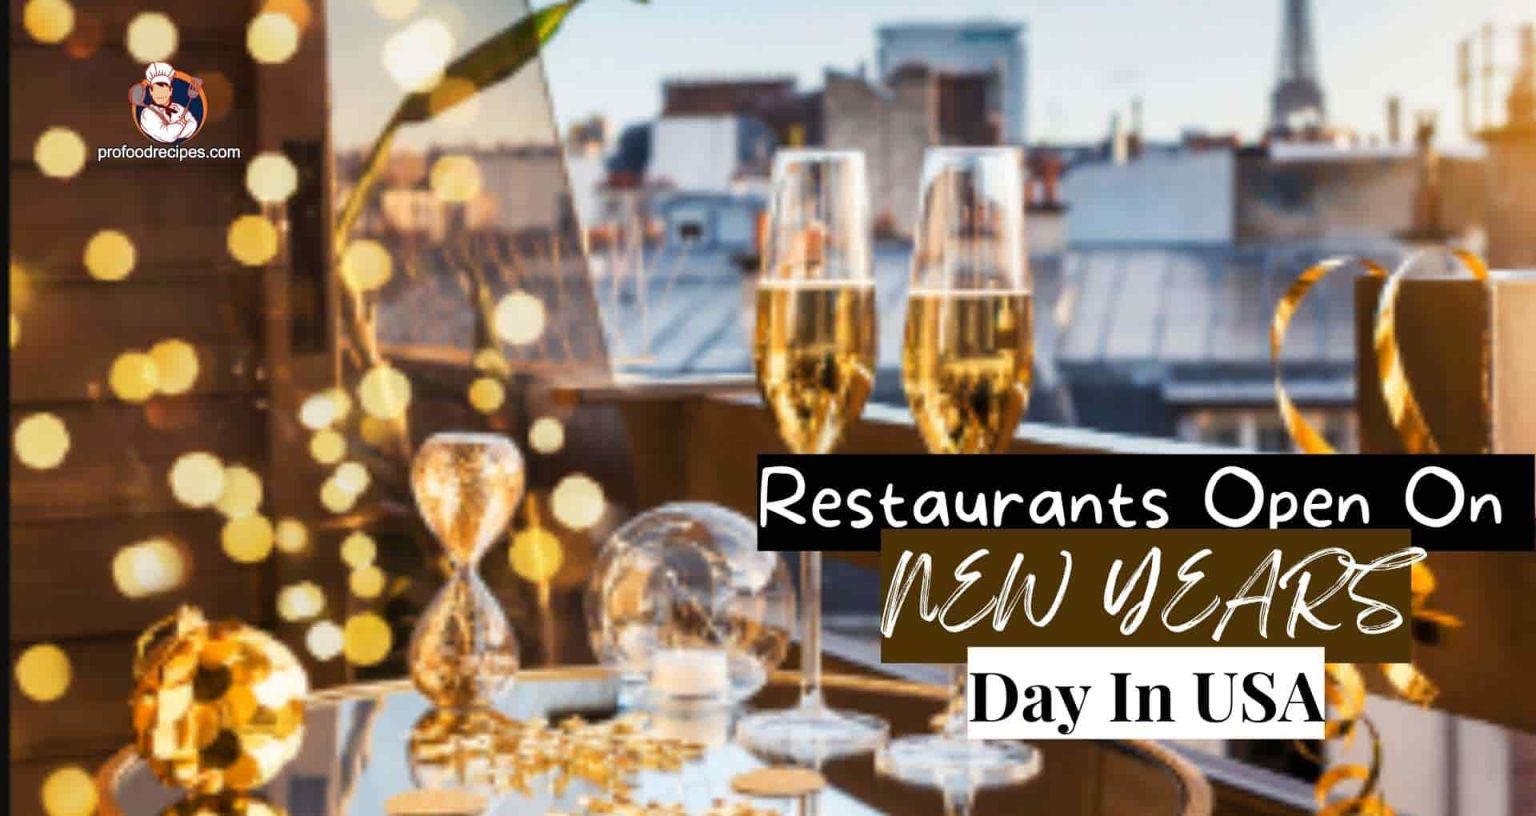 Restaurants Open On New Years Day In USA 1536x816 